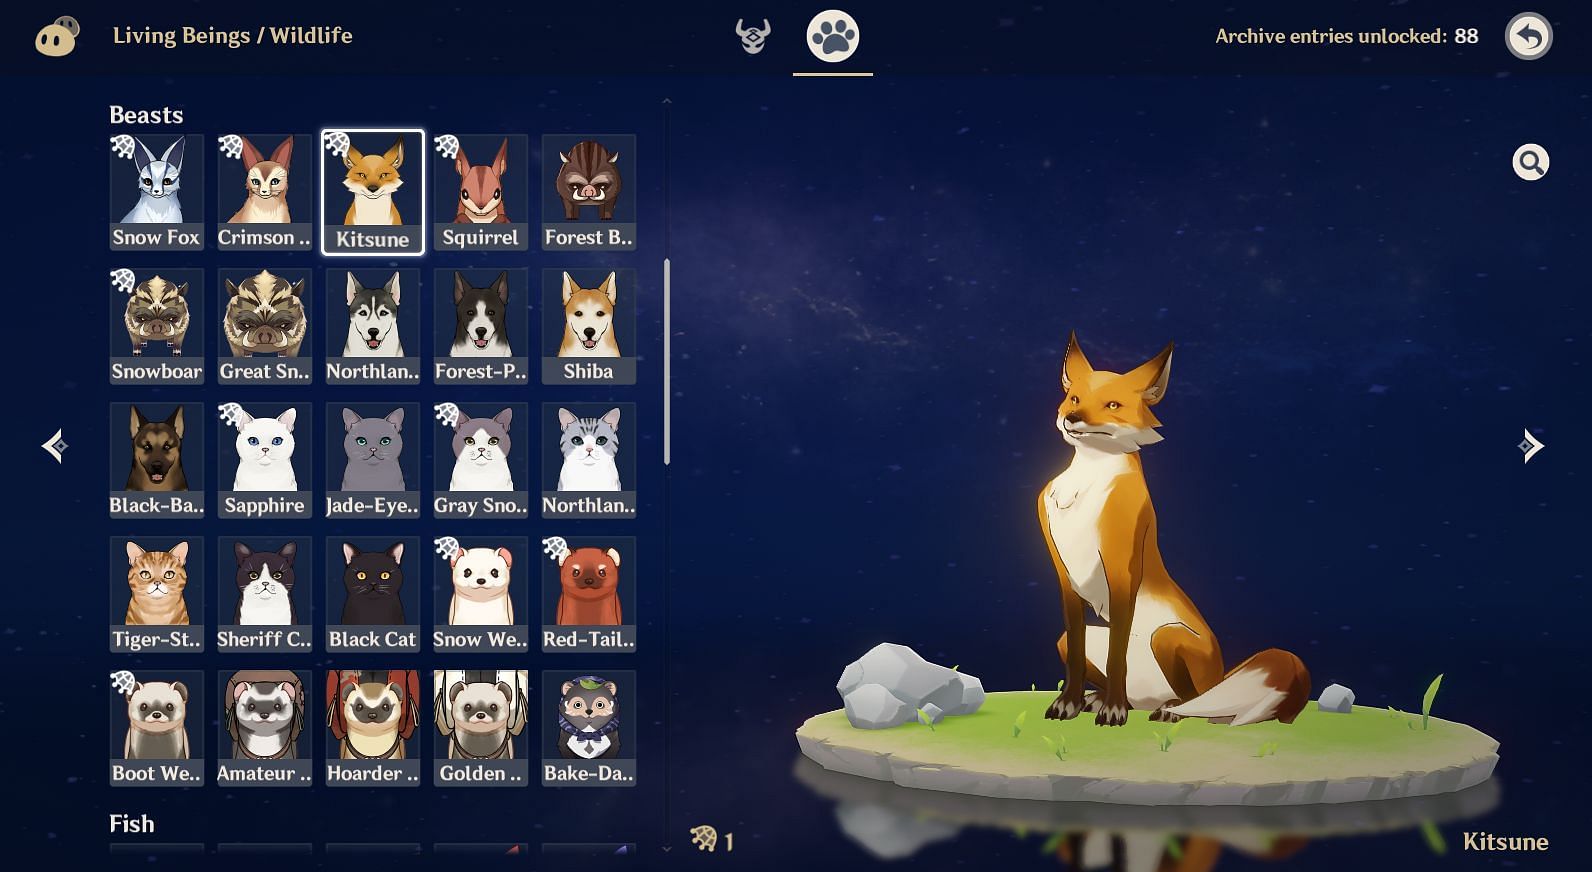 Capturable animals can be spotted in the Archive by the net icon (Image via Genshin Impact)